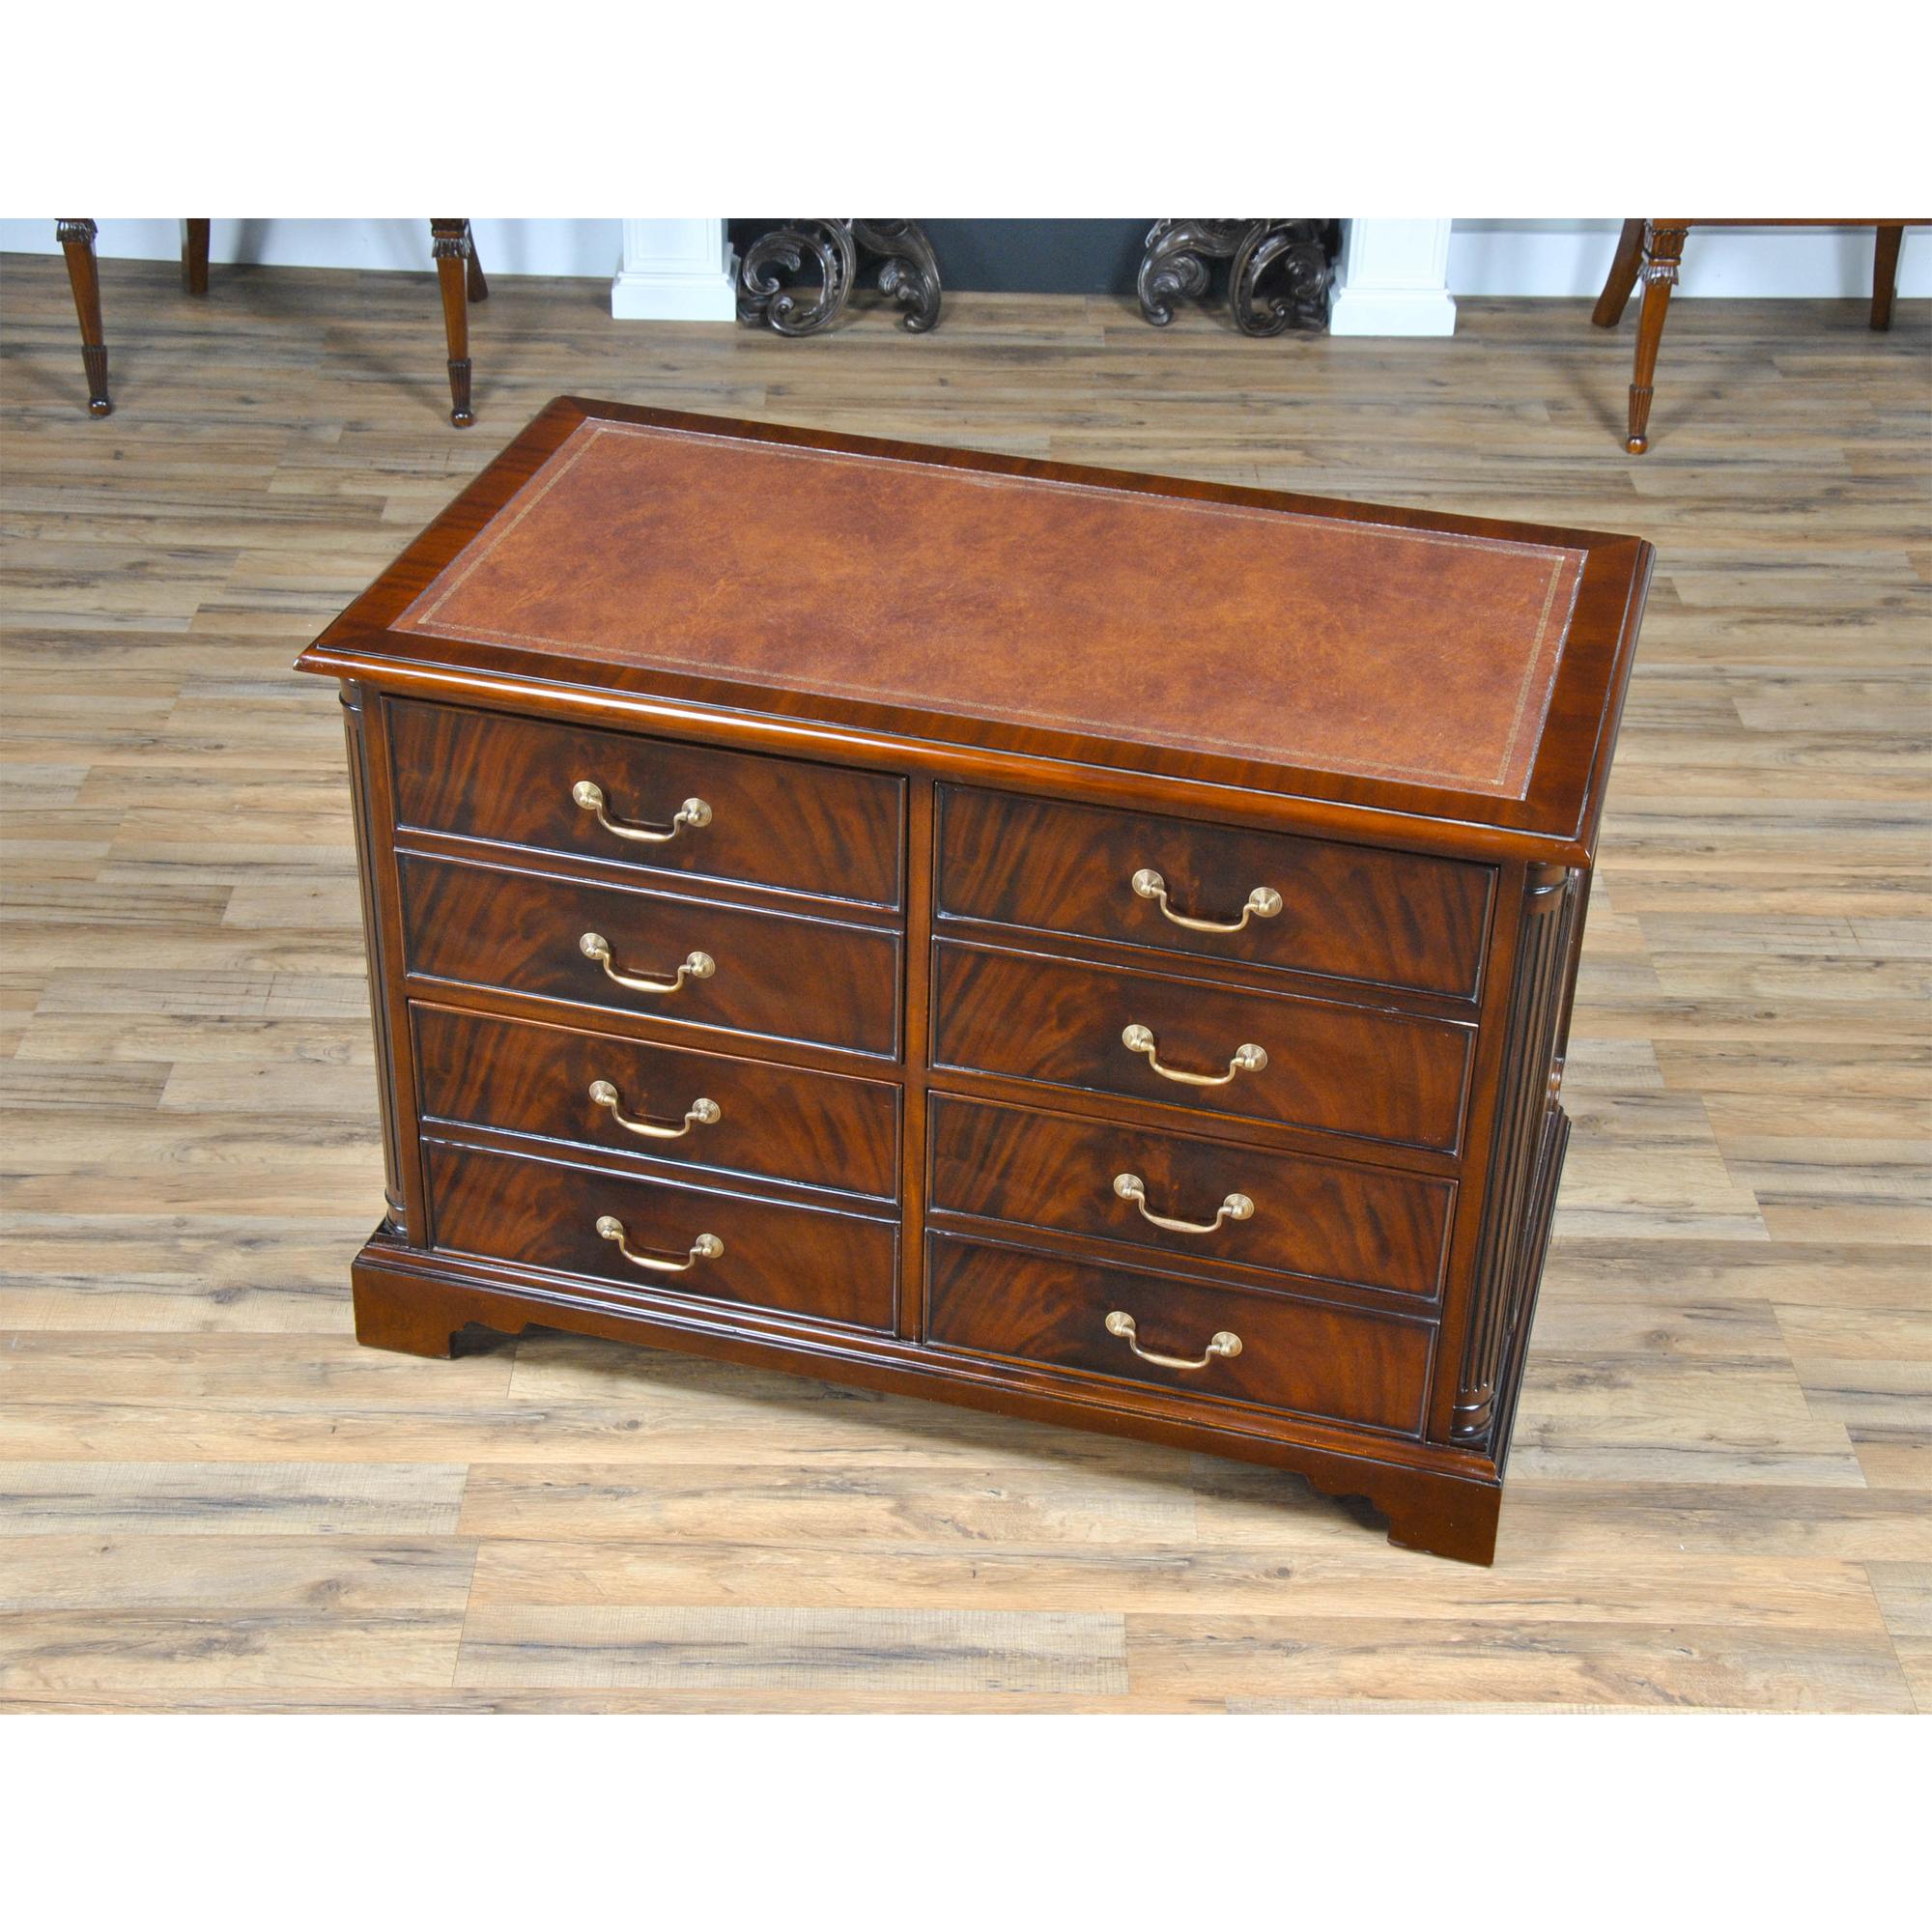 A highly functional and decorative piece this Four Drawer File cabinet is made with figured mahogany. The top of the cabinet is covered in a full grain brown leather panel which is attractively tooled around the edge with gold tooling. In the front